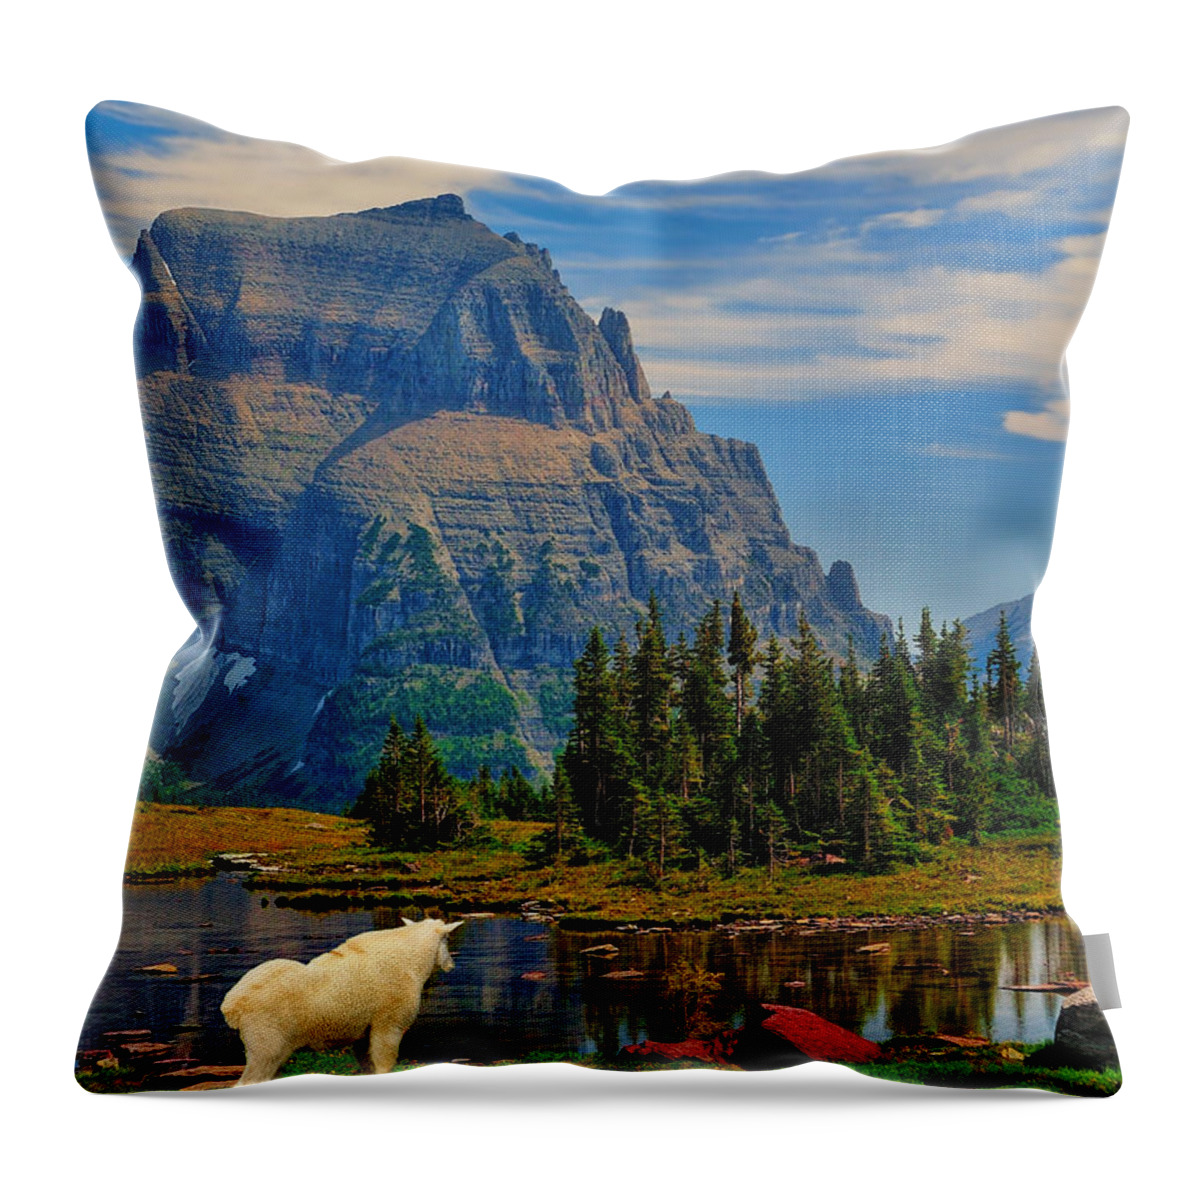 Glacier National Park Throw Pillow featuring the photograph Logan Pass in Glacier National Park by Greg Norrell